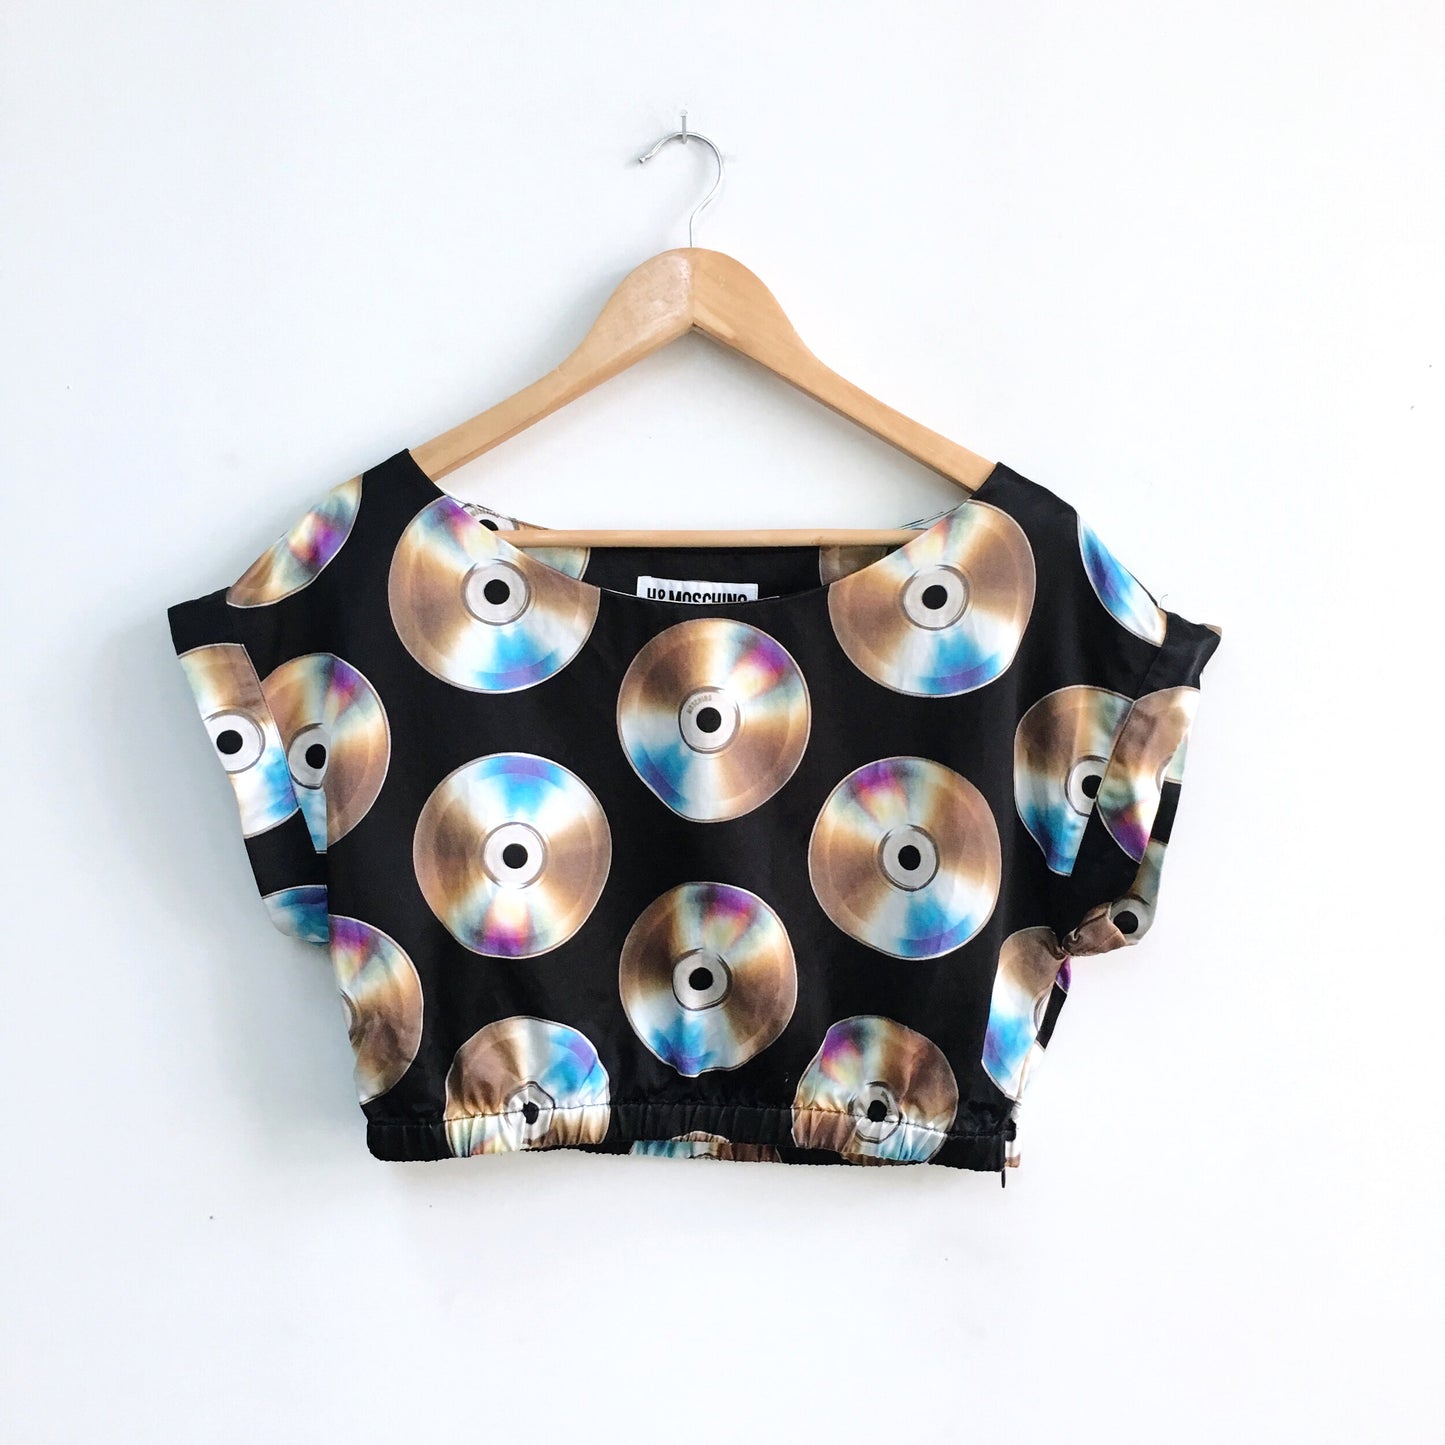 H&amp;M x MOSCHINO CD Satin Crop Top - size Small